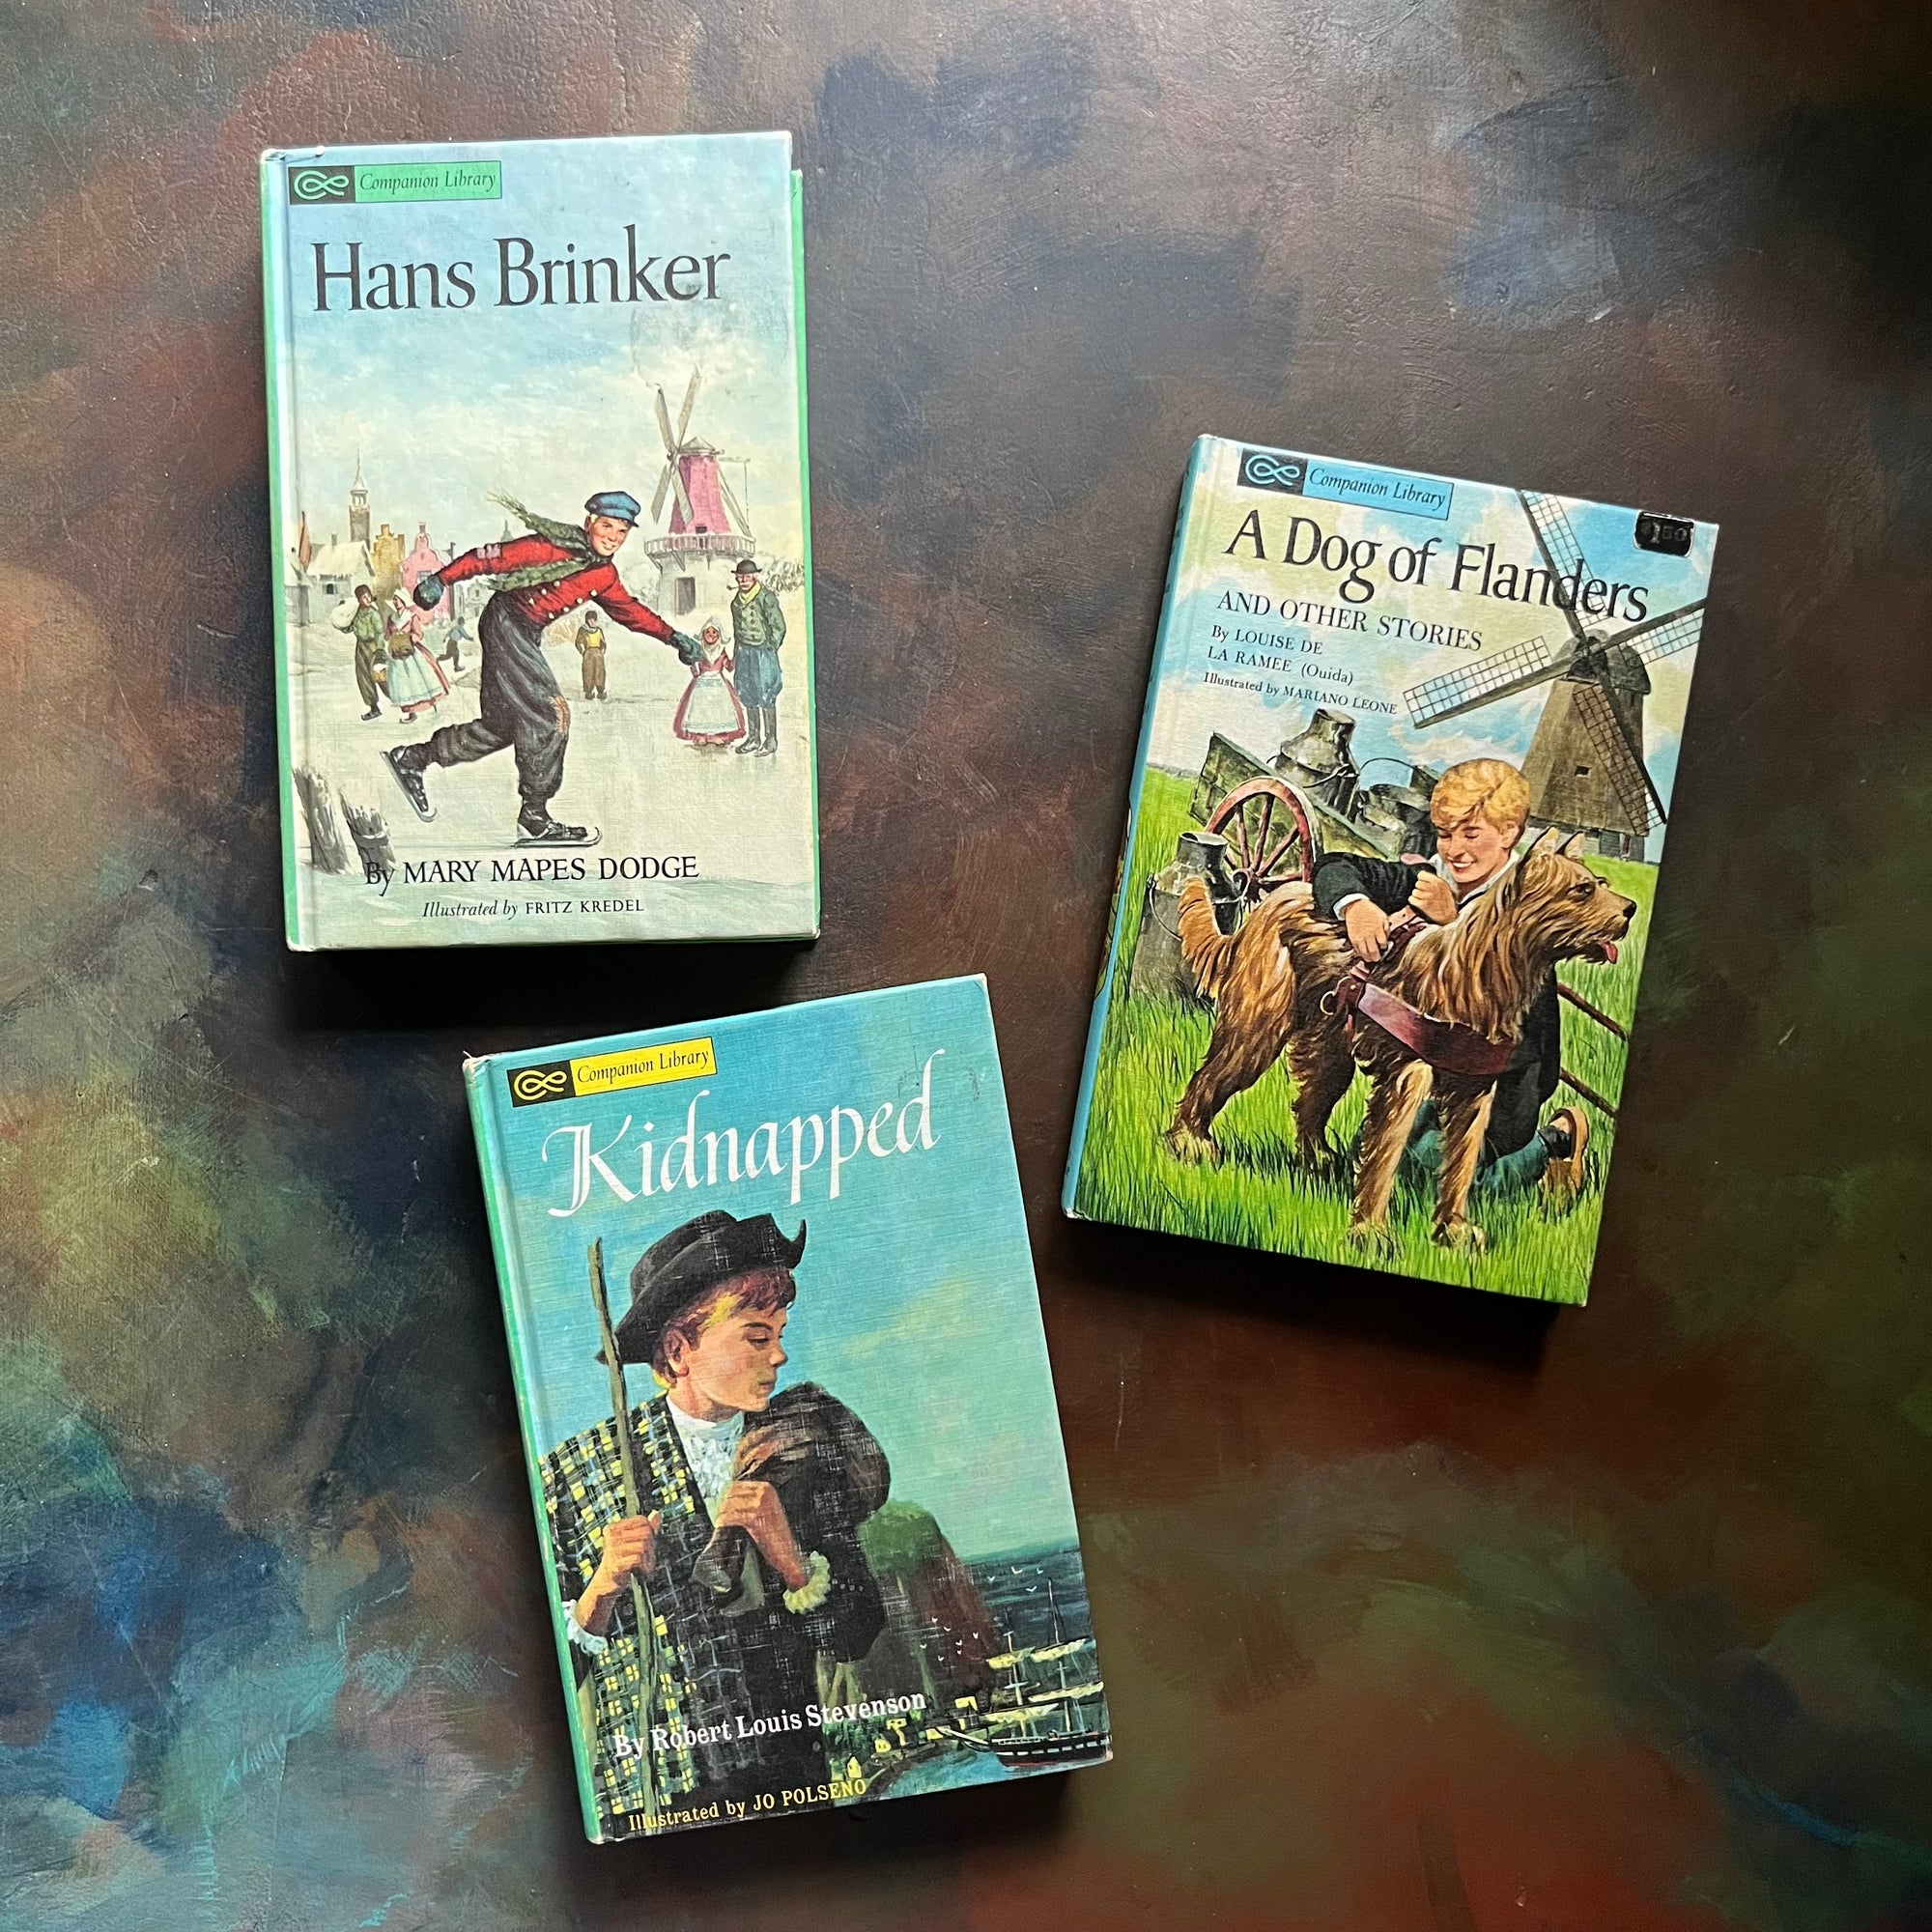 Companion Library Book Set-Kidnapped by Robert Louis Stevenson-Hans Brinker by Mary Mapes Dodge-A Dog of Flanders by Ouida-vintage children's chapter books-view of the front covers